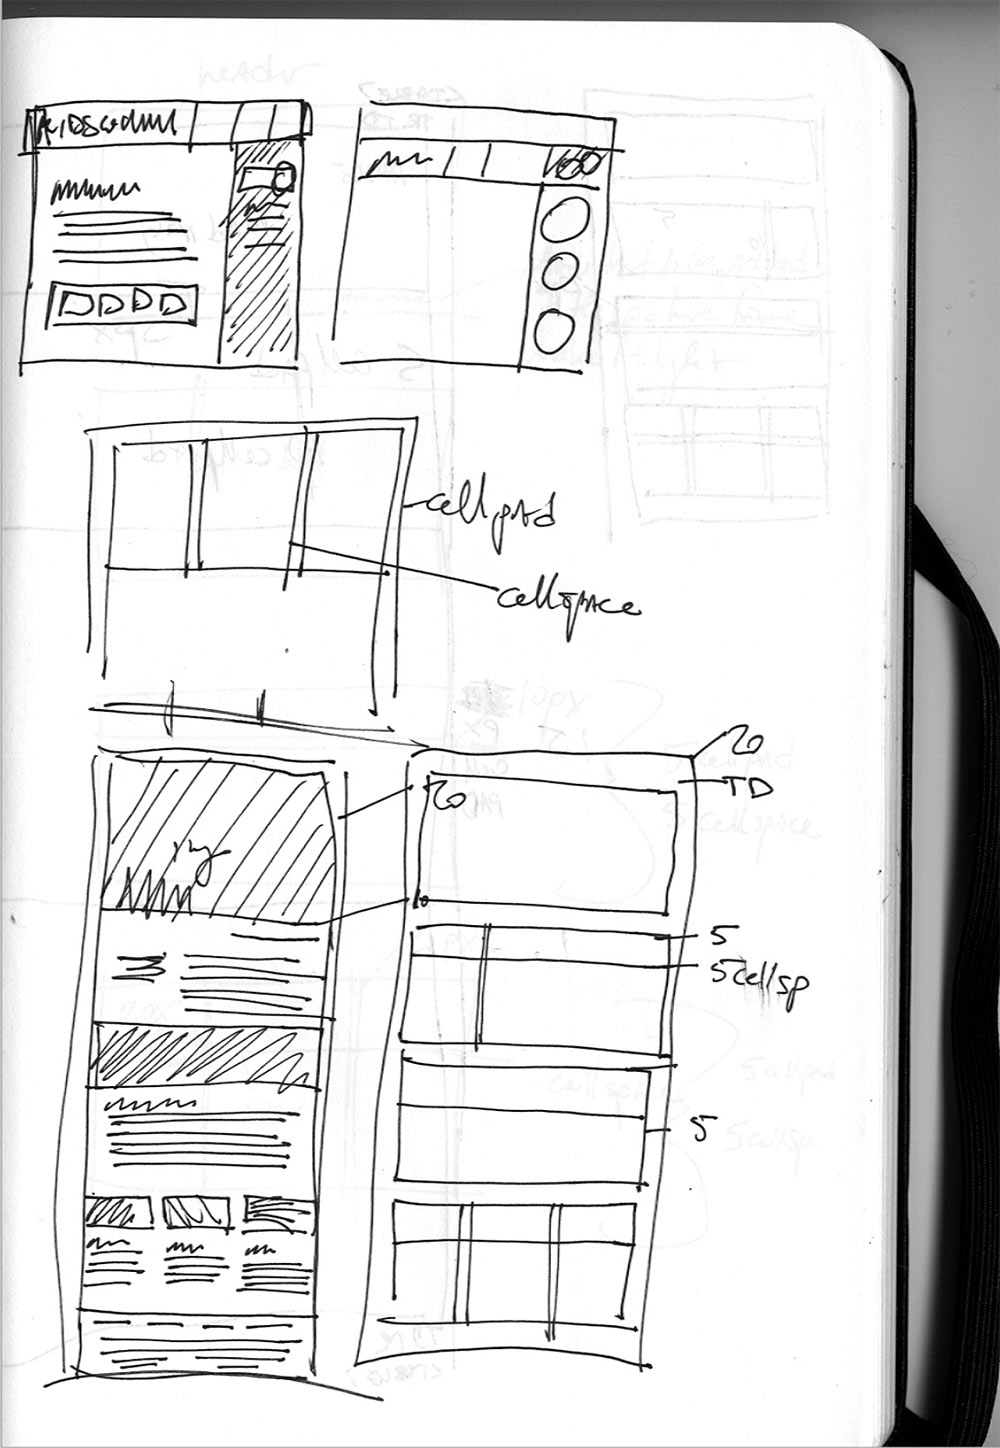 a sketchbook with wireframe drawings